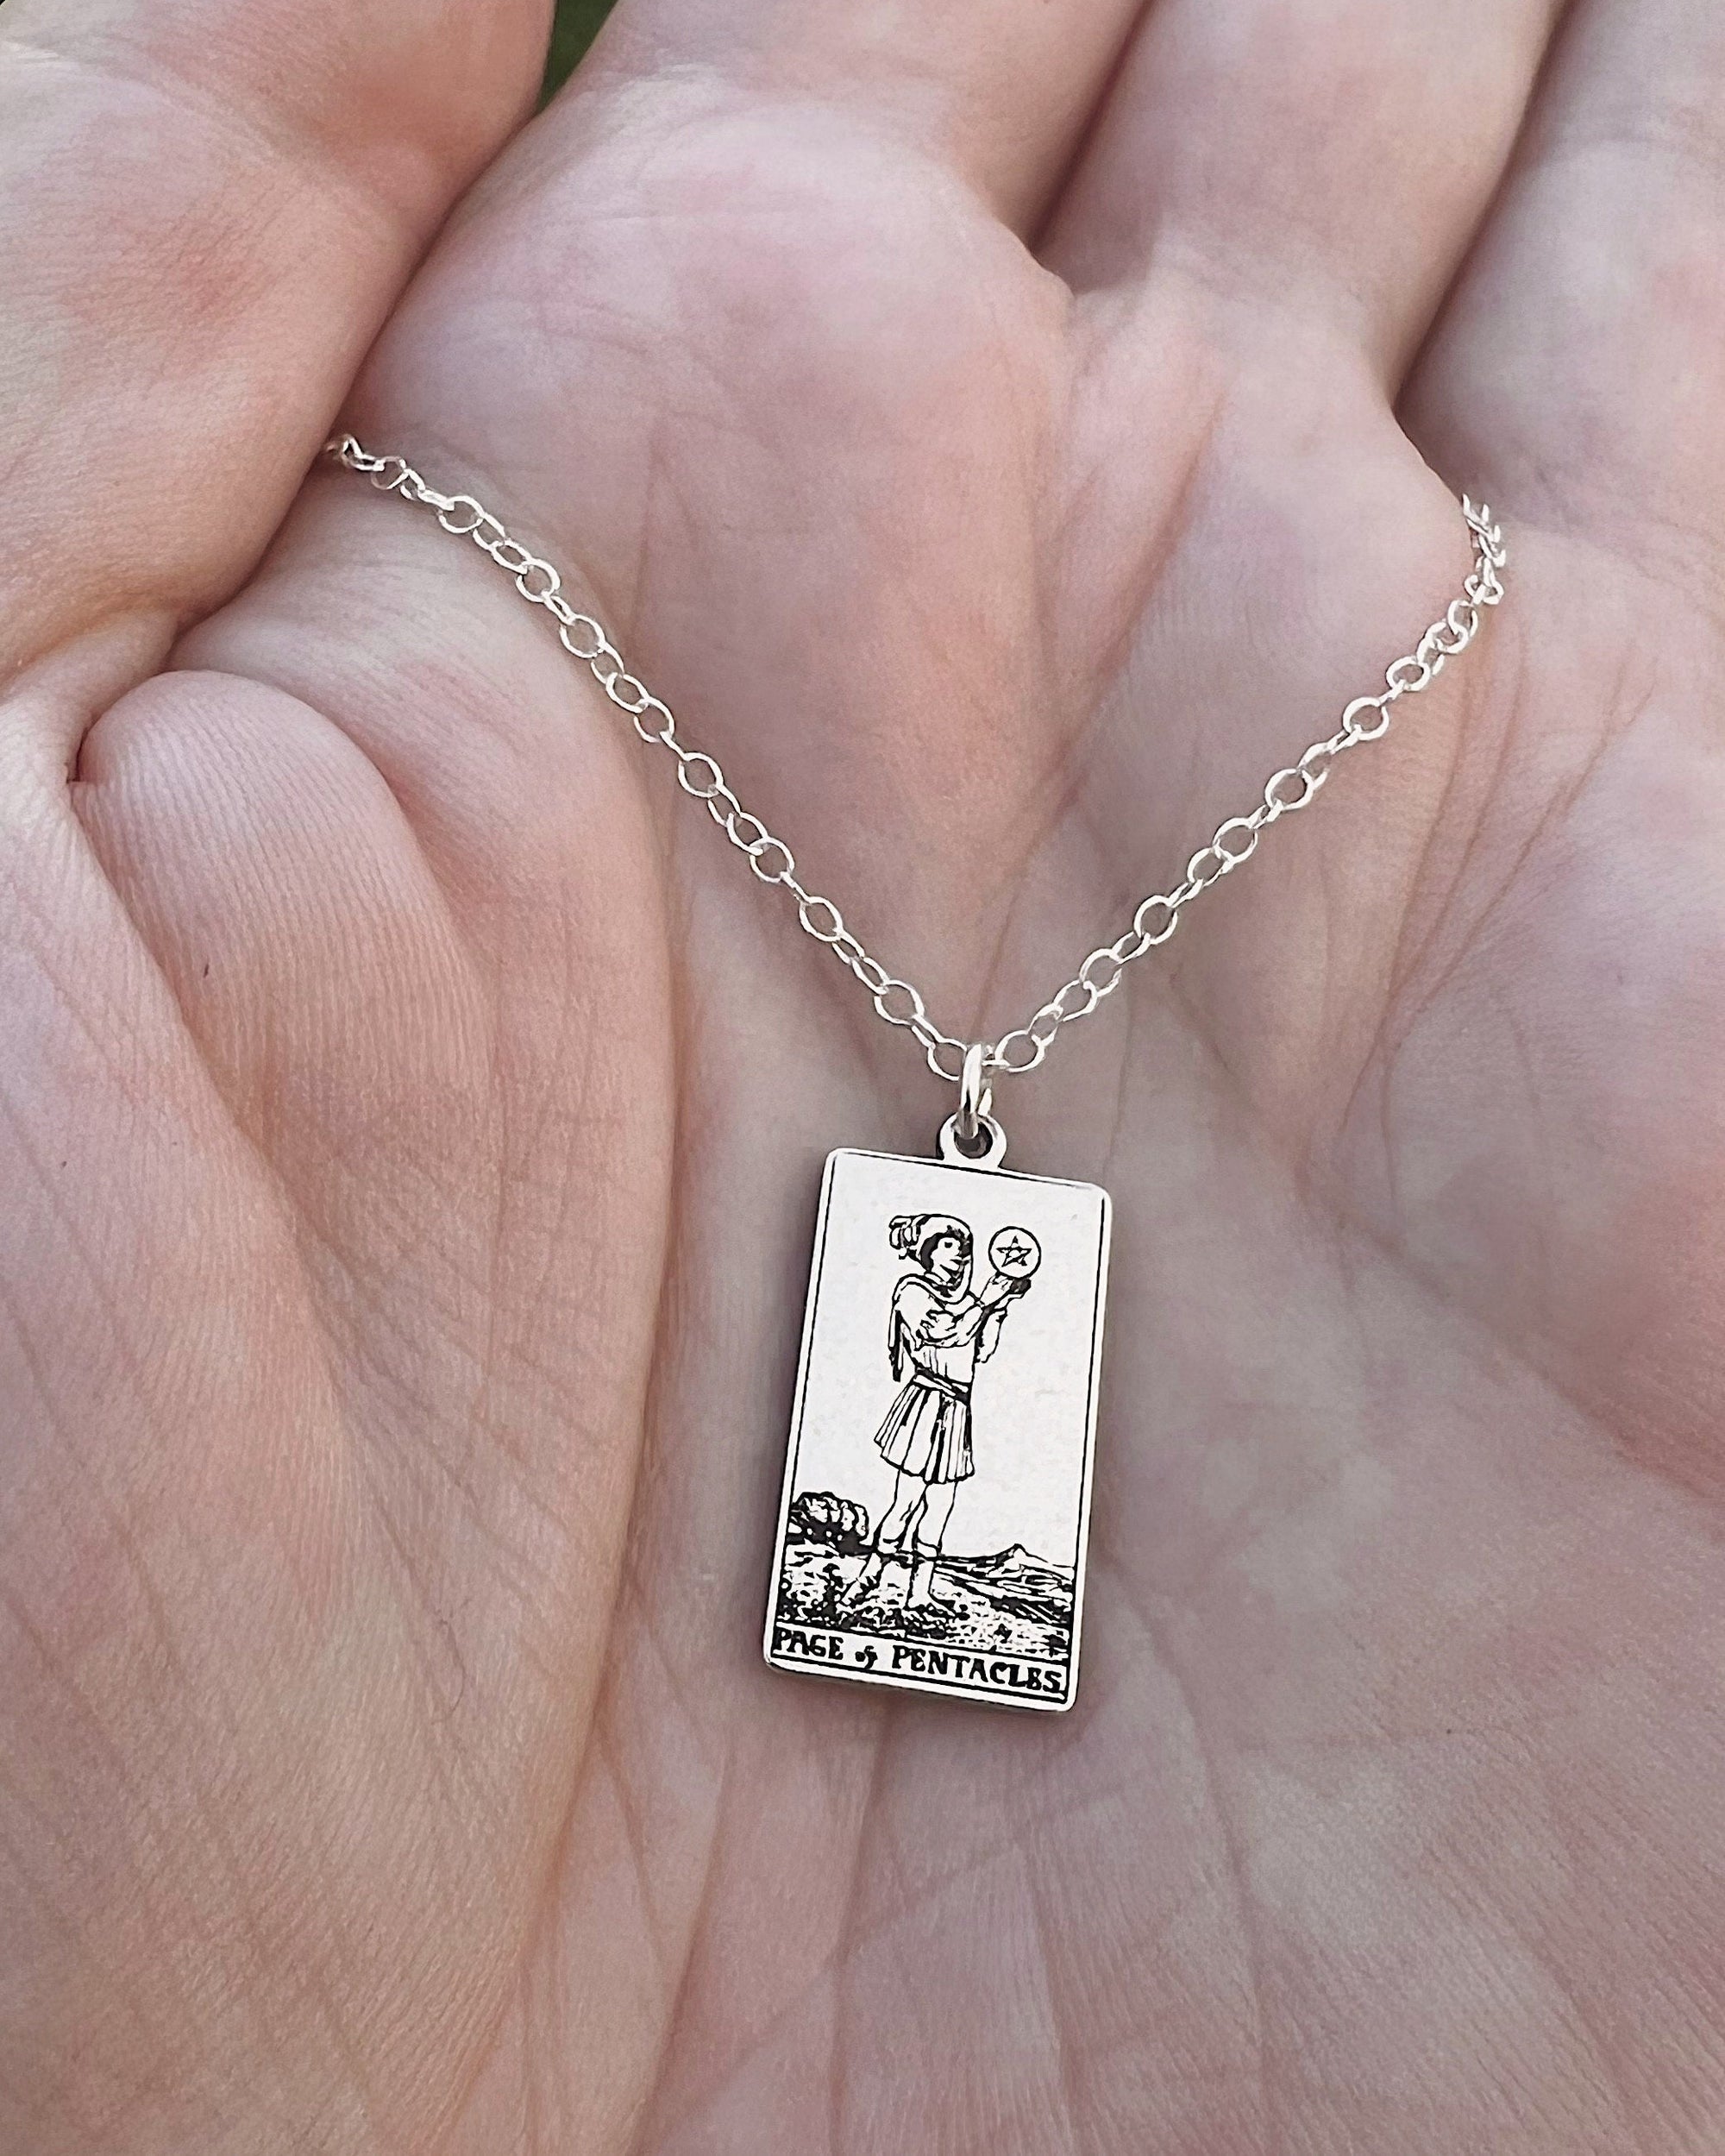 Page of Pentacles Tarot Card Necklace - Sterling Silver